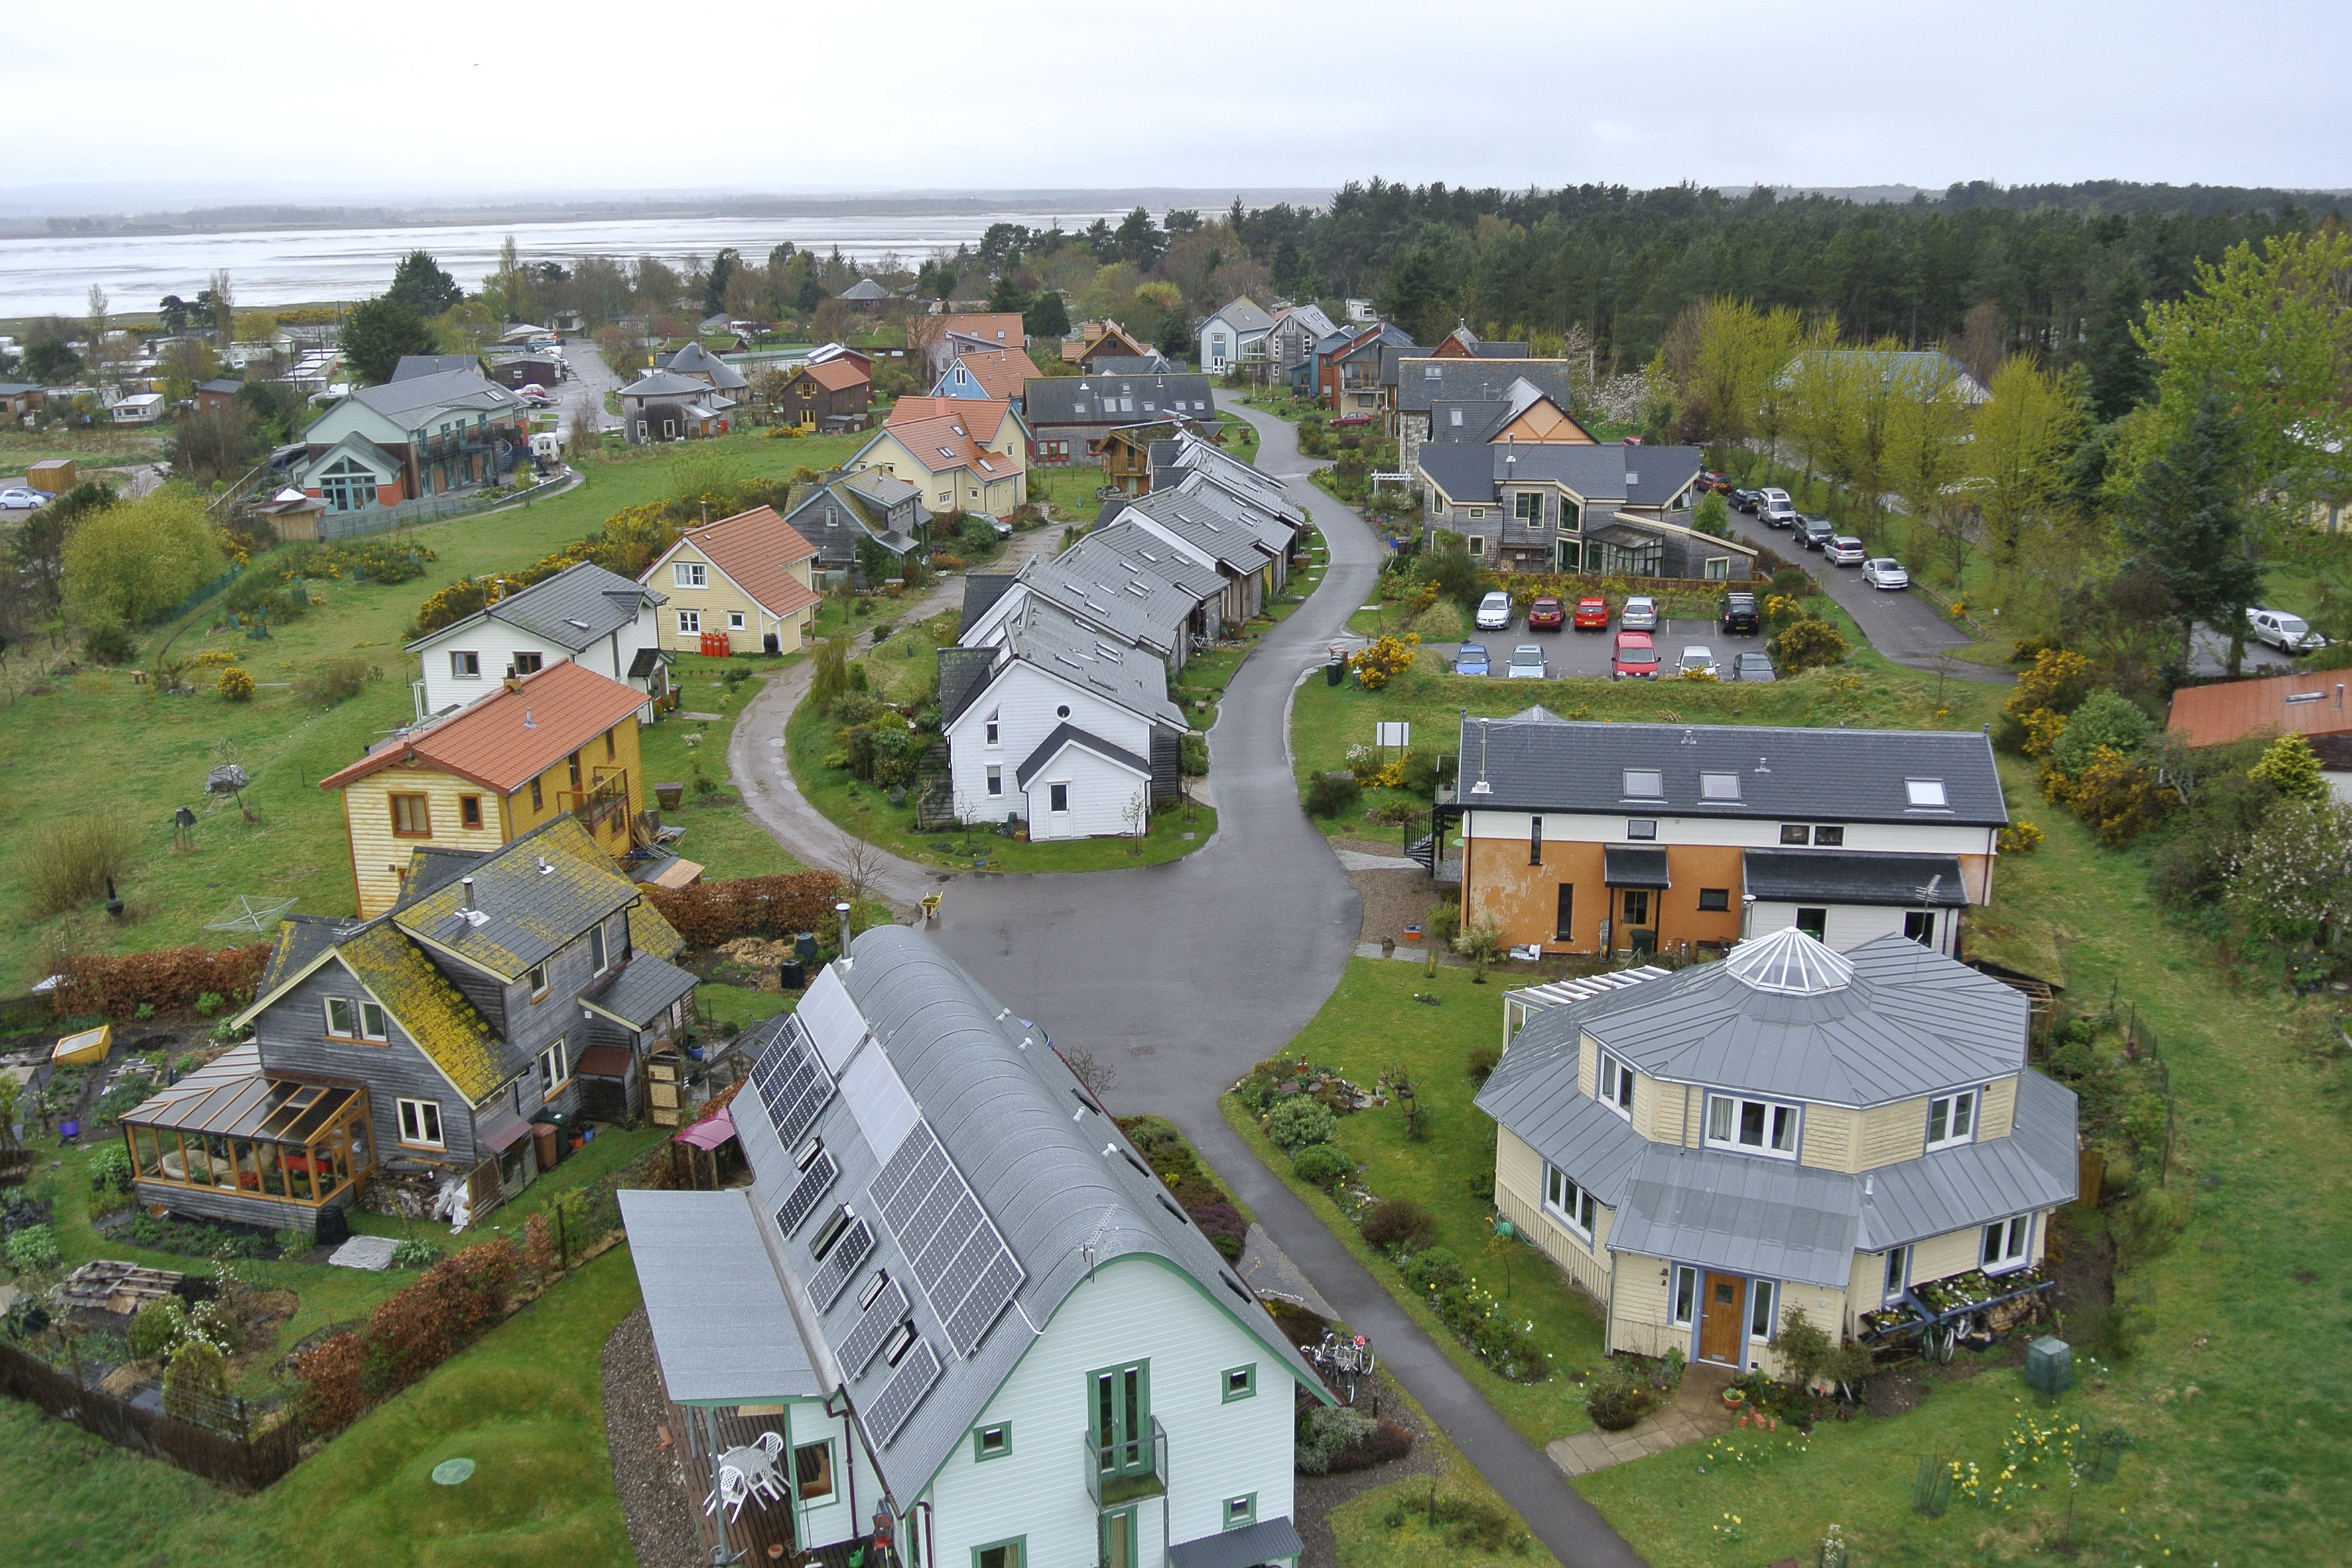 An arial view of the The Findhorn Foundation complex.